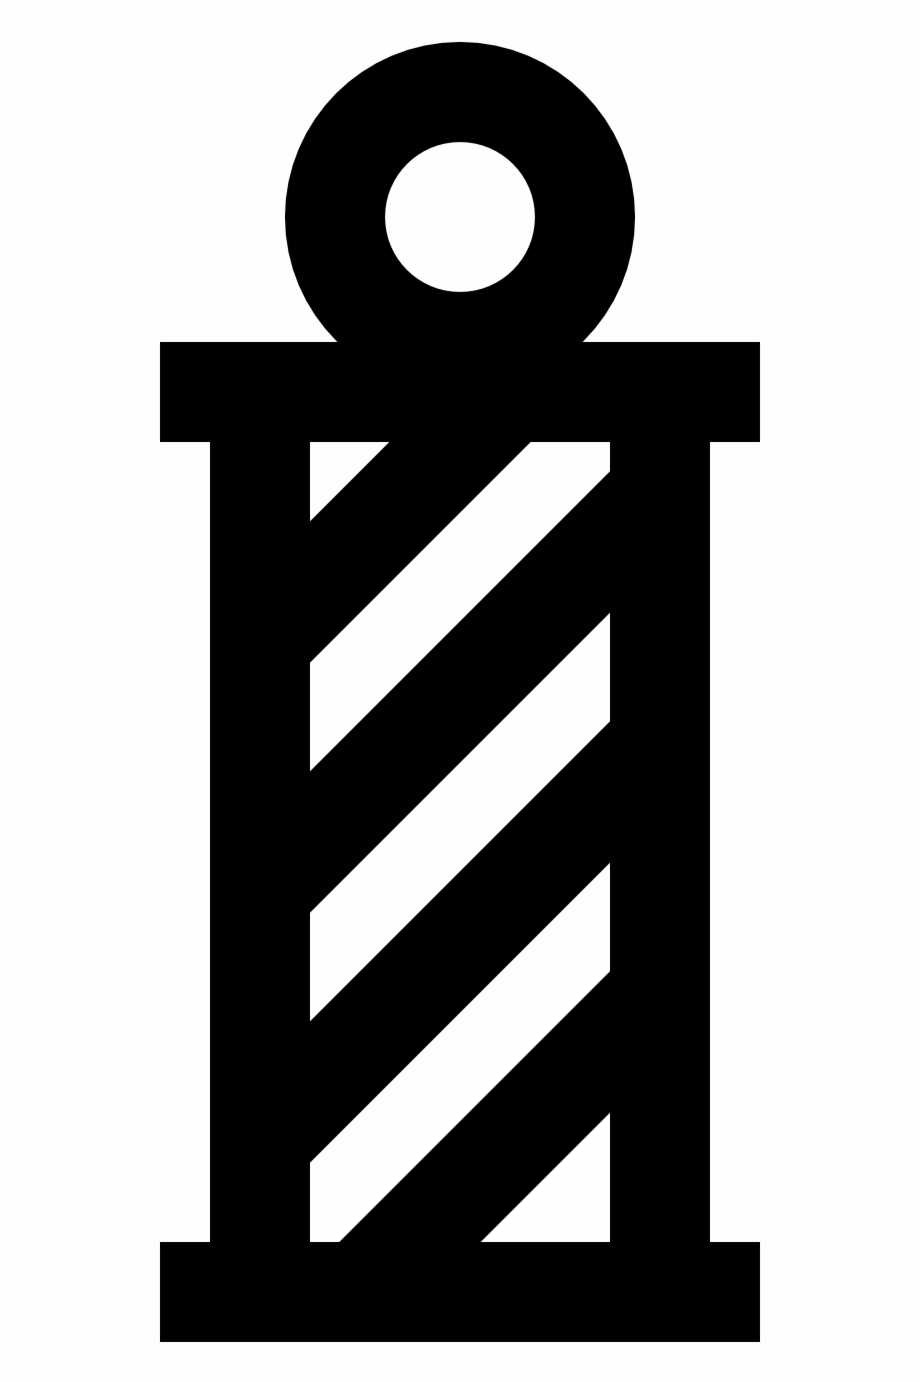 Barber Pole Icon Free Download At Icons8 Barber